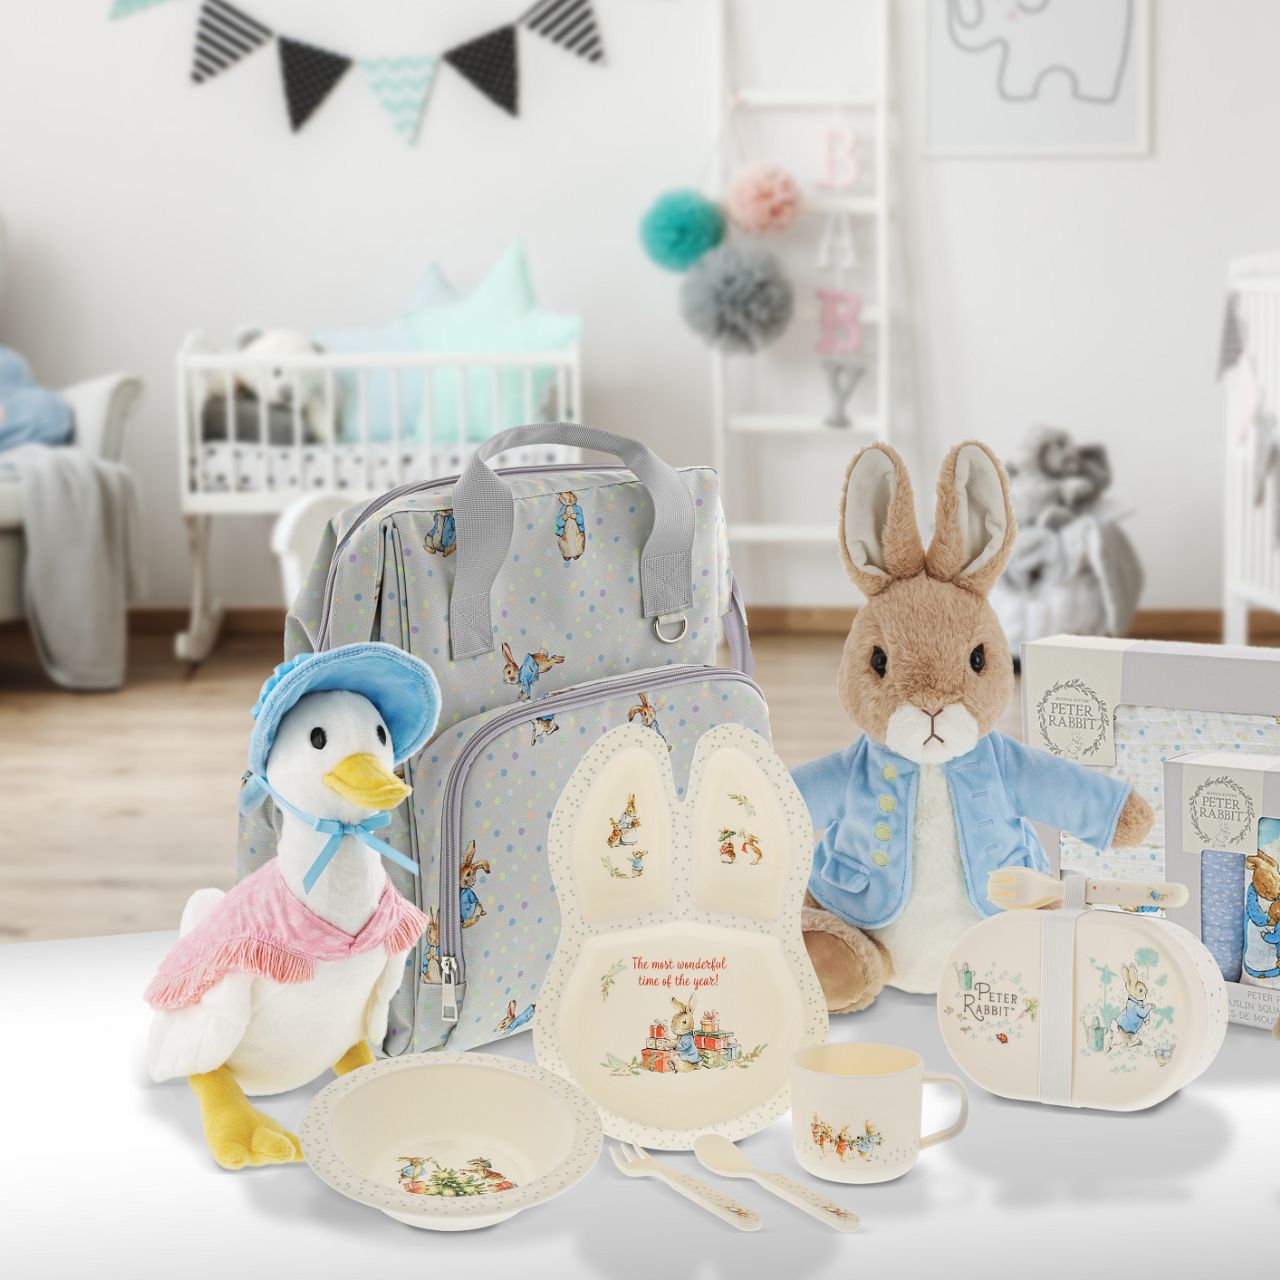 Jemima Puddle-Duck Large Peter Rabbit Collection  This Jemima Puddle-Duck soft toy is made from beautifully soft fabric and is dressed in clothing exactly as illustrated by Beatrix Potter,With her signature beautiful bonnet and shawl. The Peter Rabbit collection features the much loved characters from the Beatrix Potter books and this quality and authentic soft toy is sure to be adored for many years to come